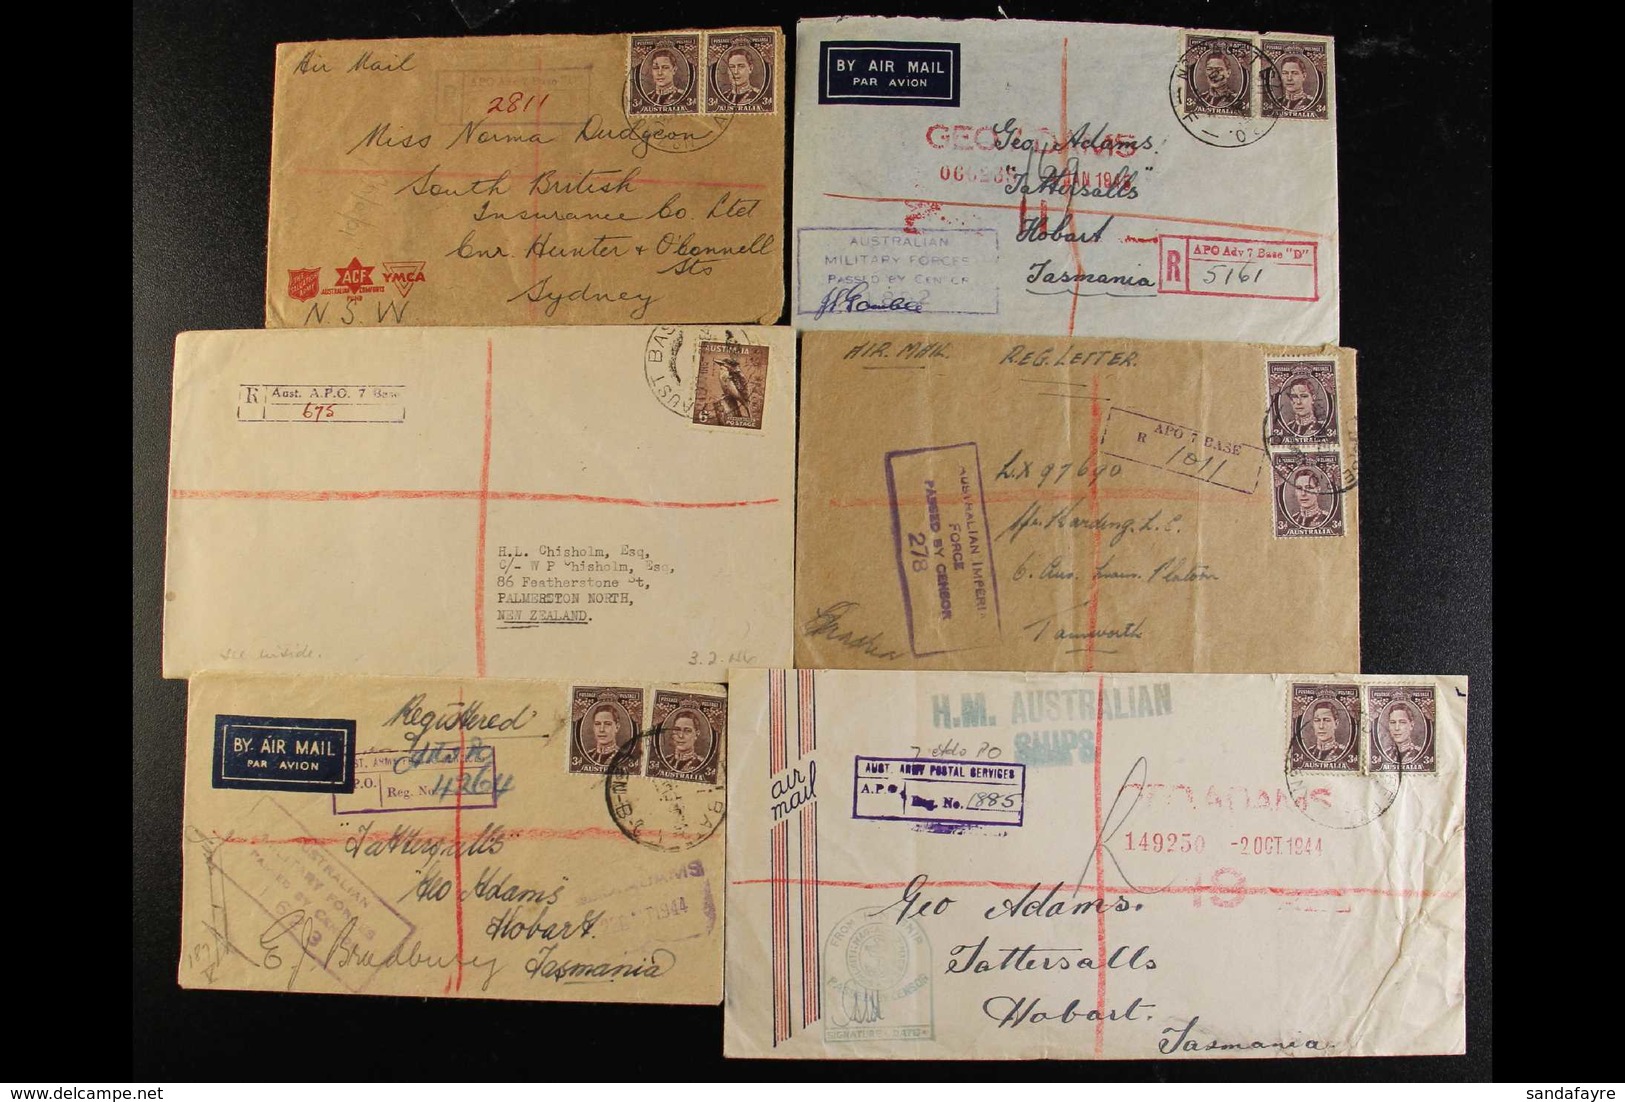 WW2 AUSTRALIAN FORCES - ADVANCE BASE P.O. A Fine Group Of Covers Back To Australia Or One To NZ, Bearing Australian KGVI - Papouasie-Nouvelle-Guinée